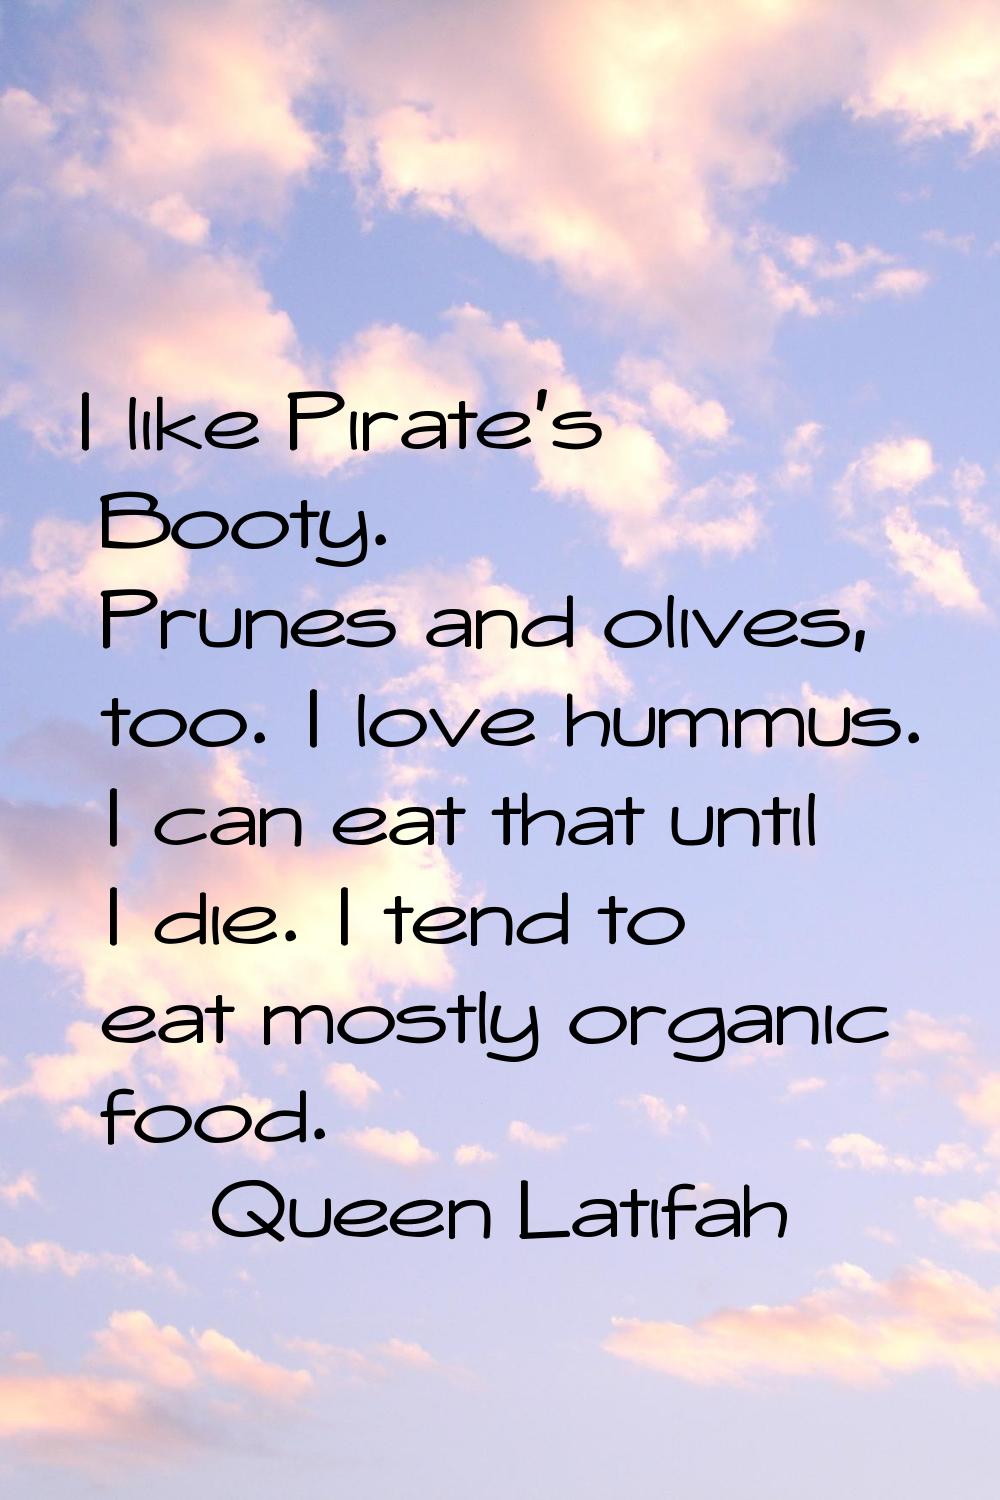 I like Pirate's Booty. Prunes and olives, too. I love hummus. I can eat that until I die. I tend to